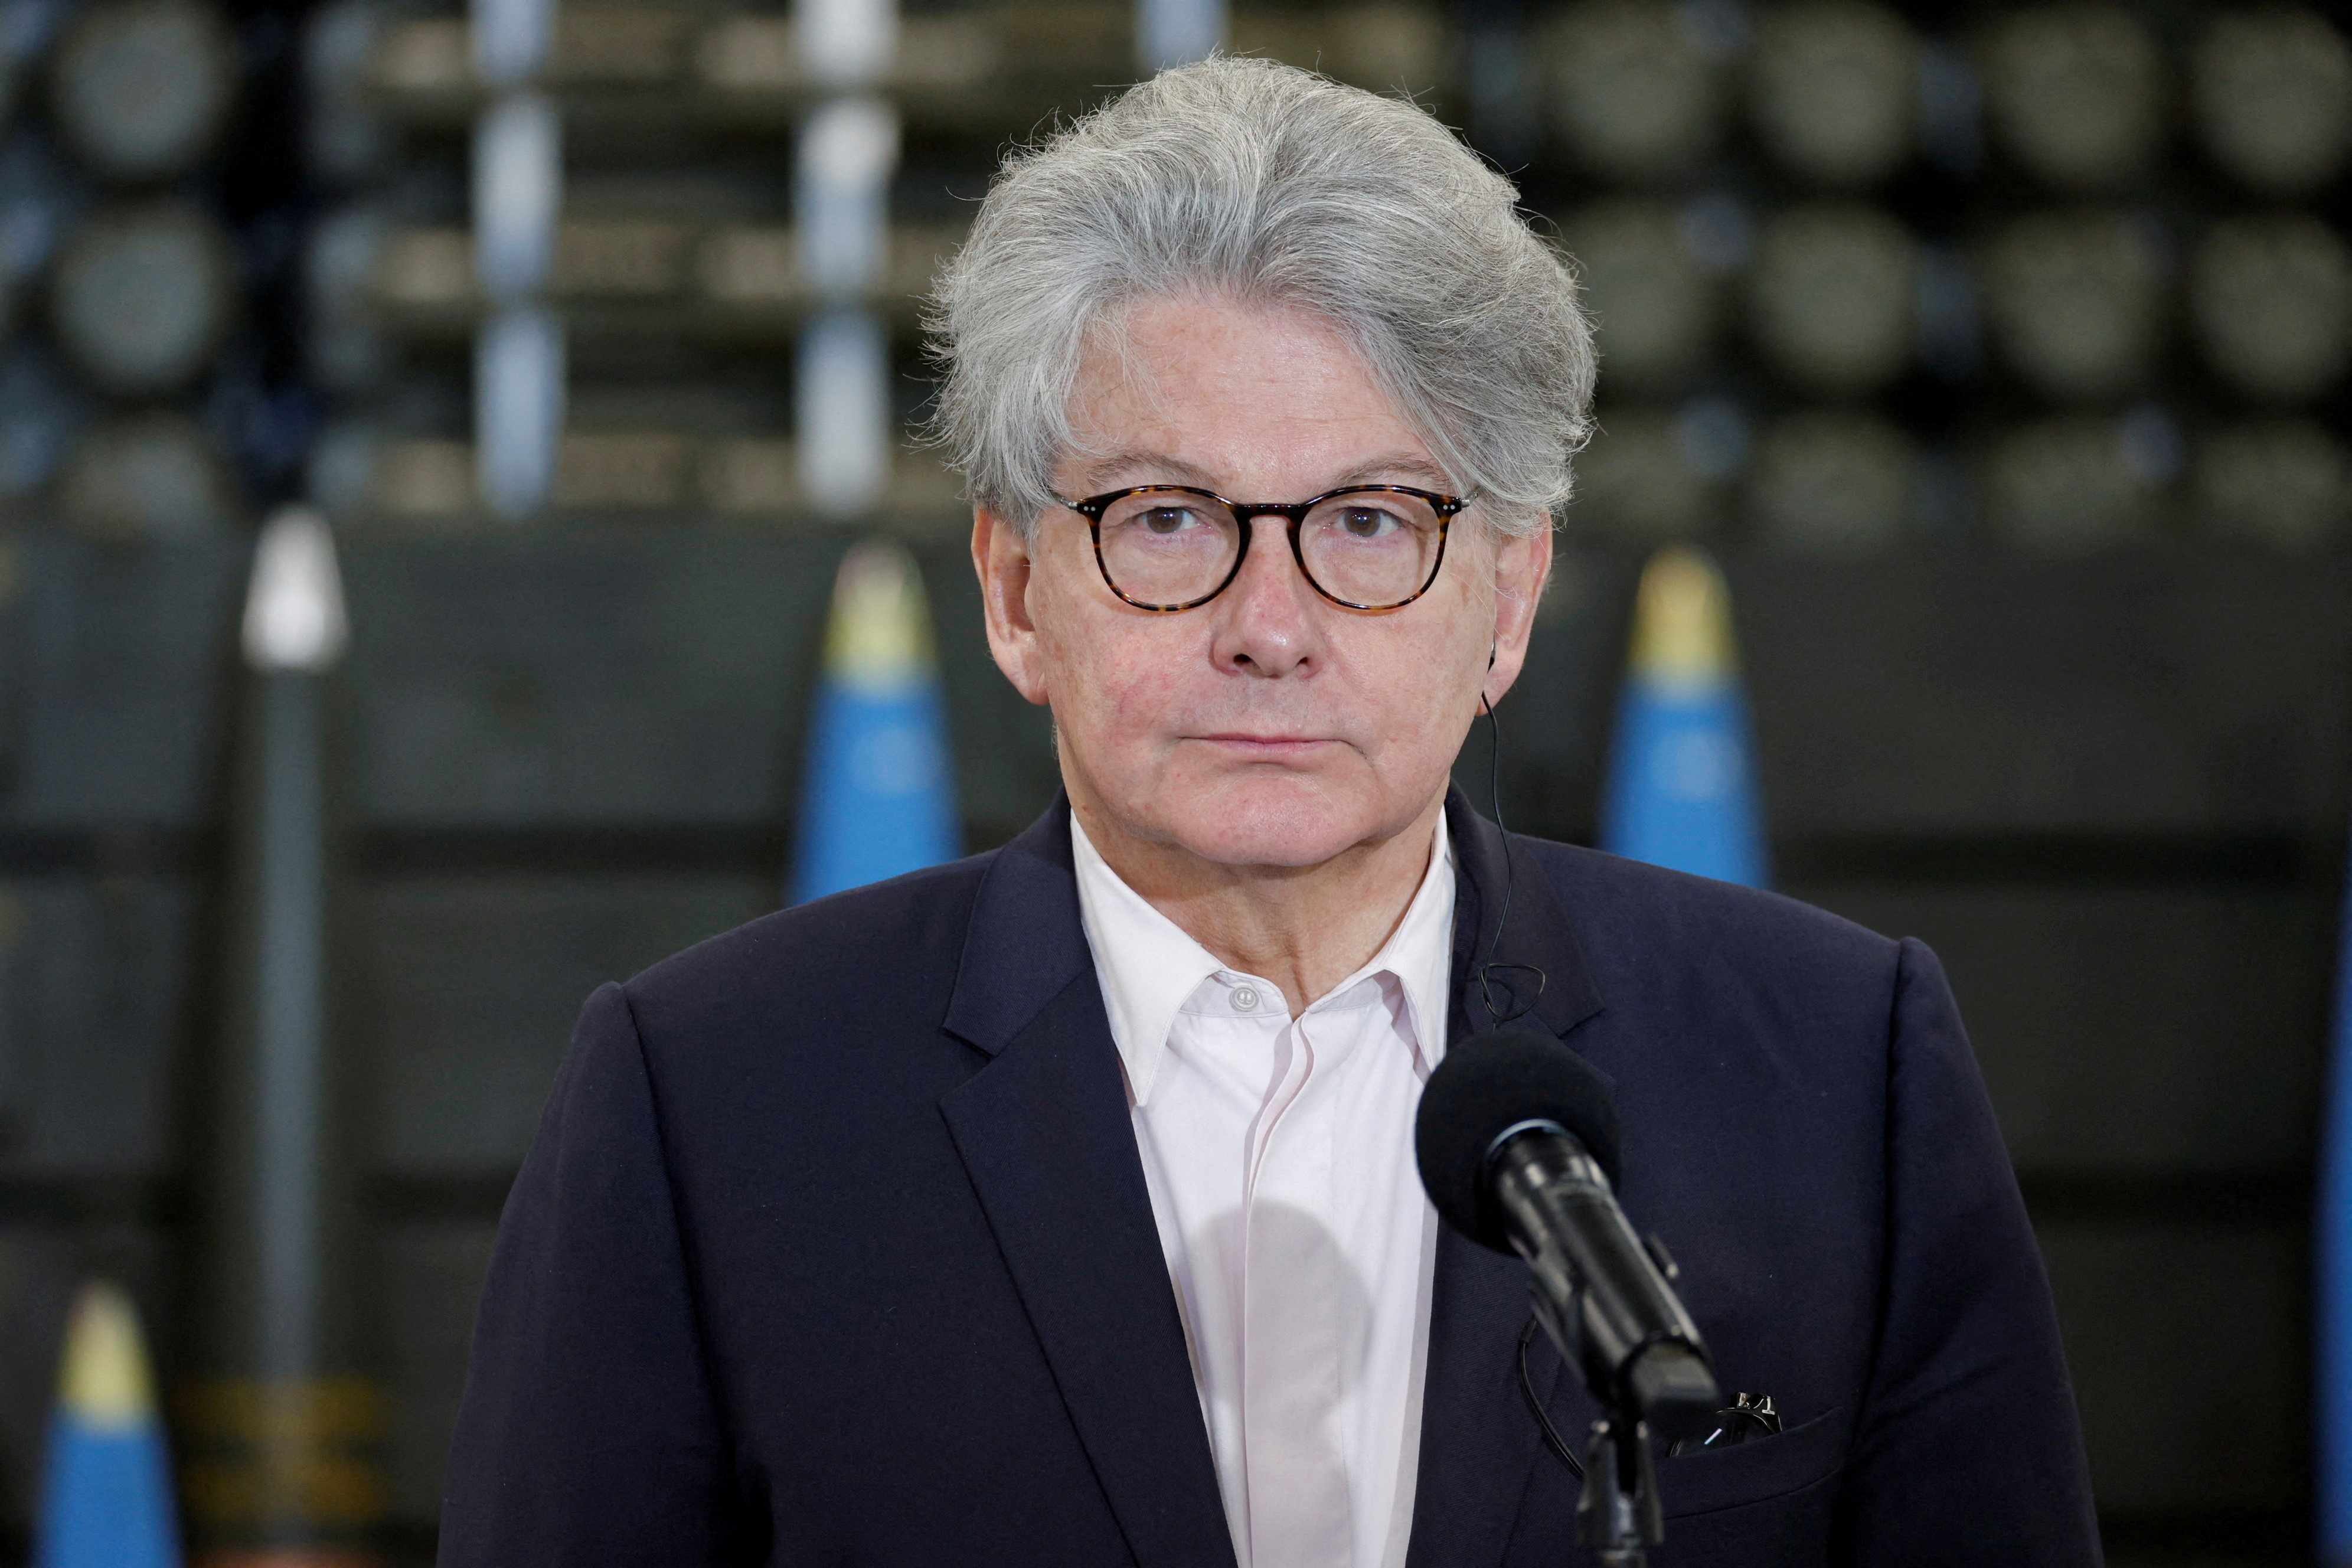 EU Commissioner for Internal Market Thierry Breton looks on during a news conference after a visit in an ammunition factory in Nowa Deba